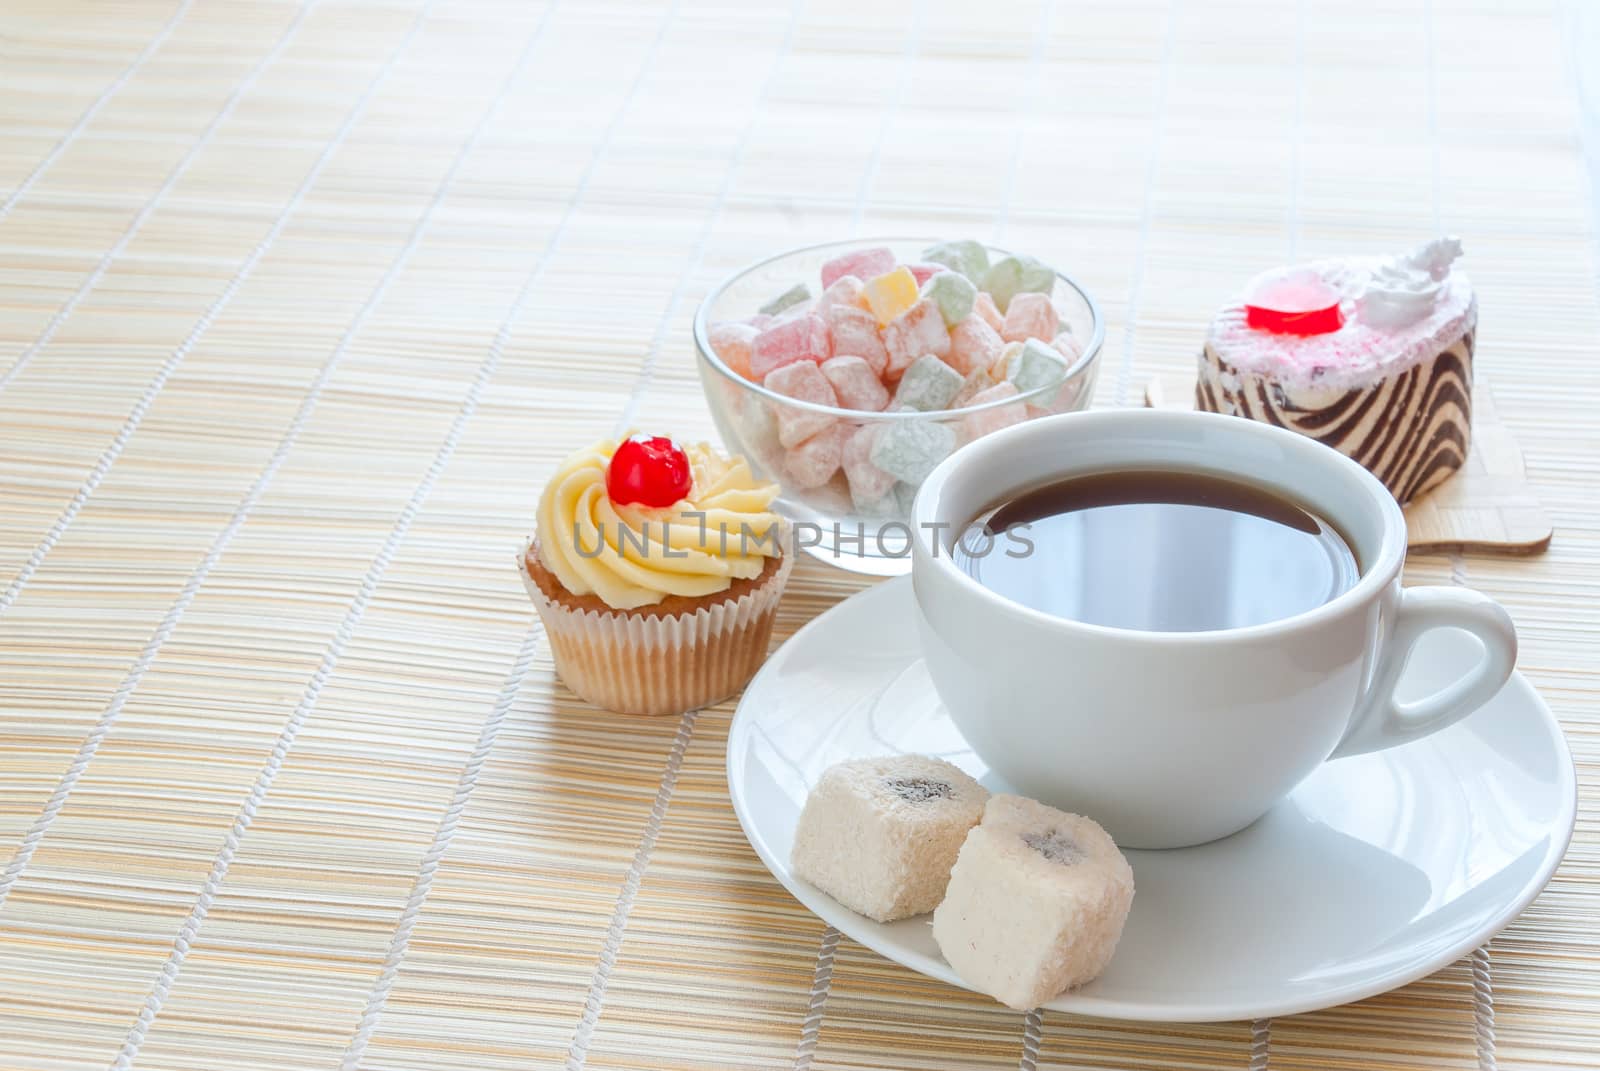 Tea, fresh cherry muffin, colorful delight and various cake, sweet dessert, with place for your text